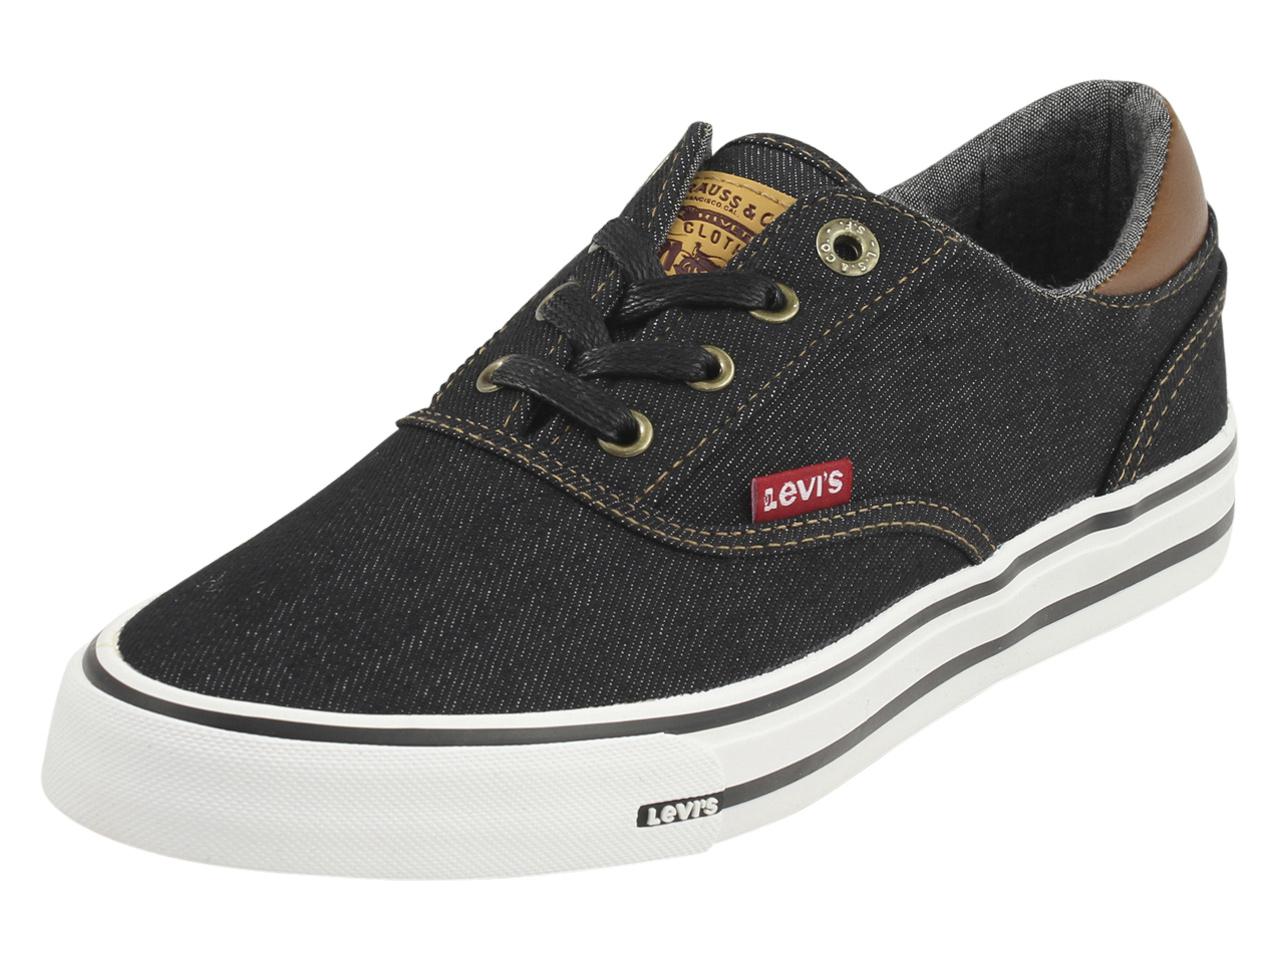 Ethan-DNM-II Levis Sneakers Shoes